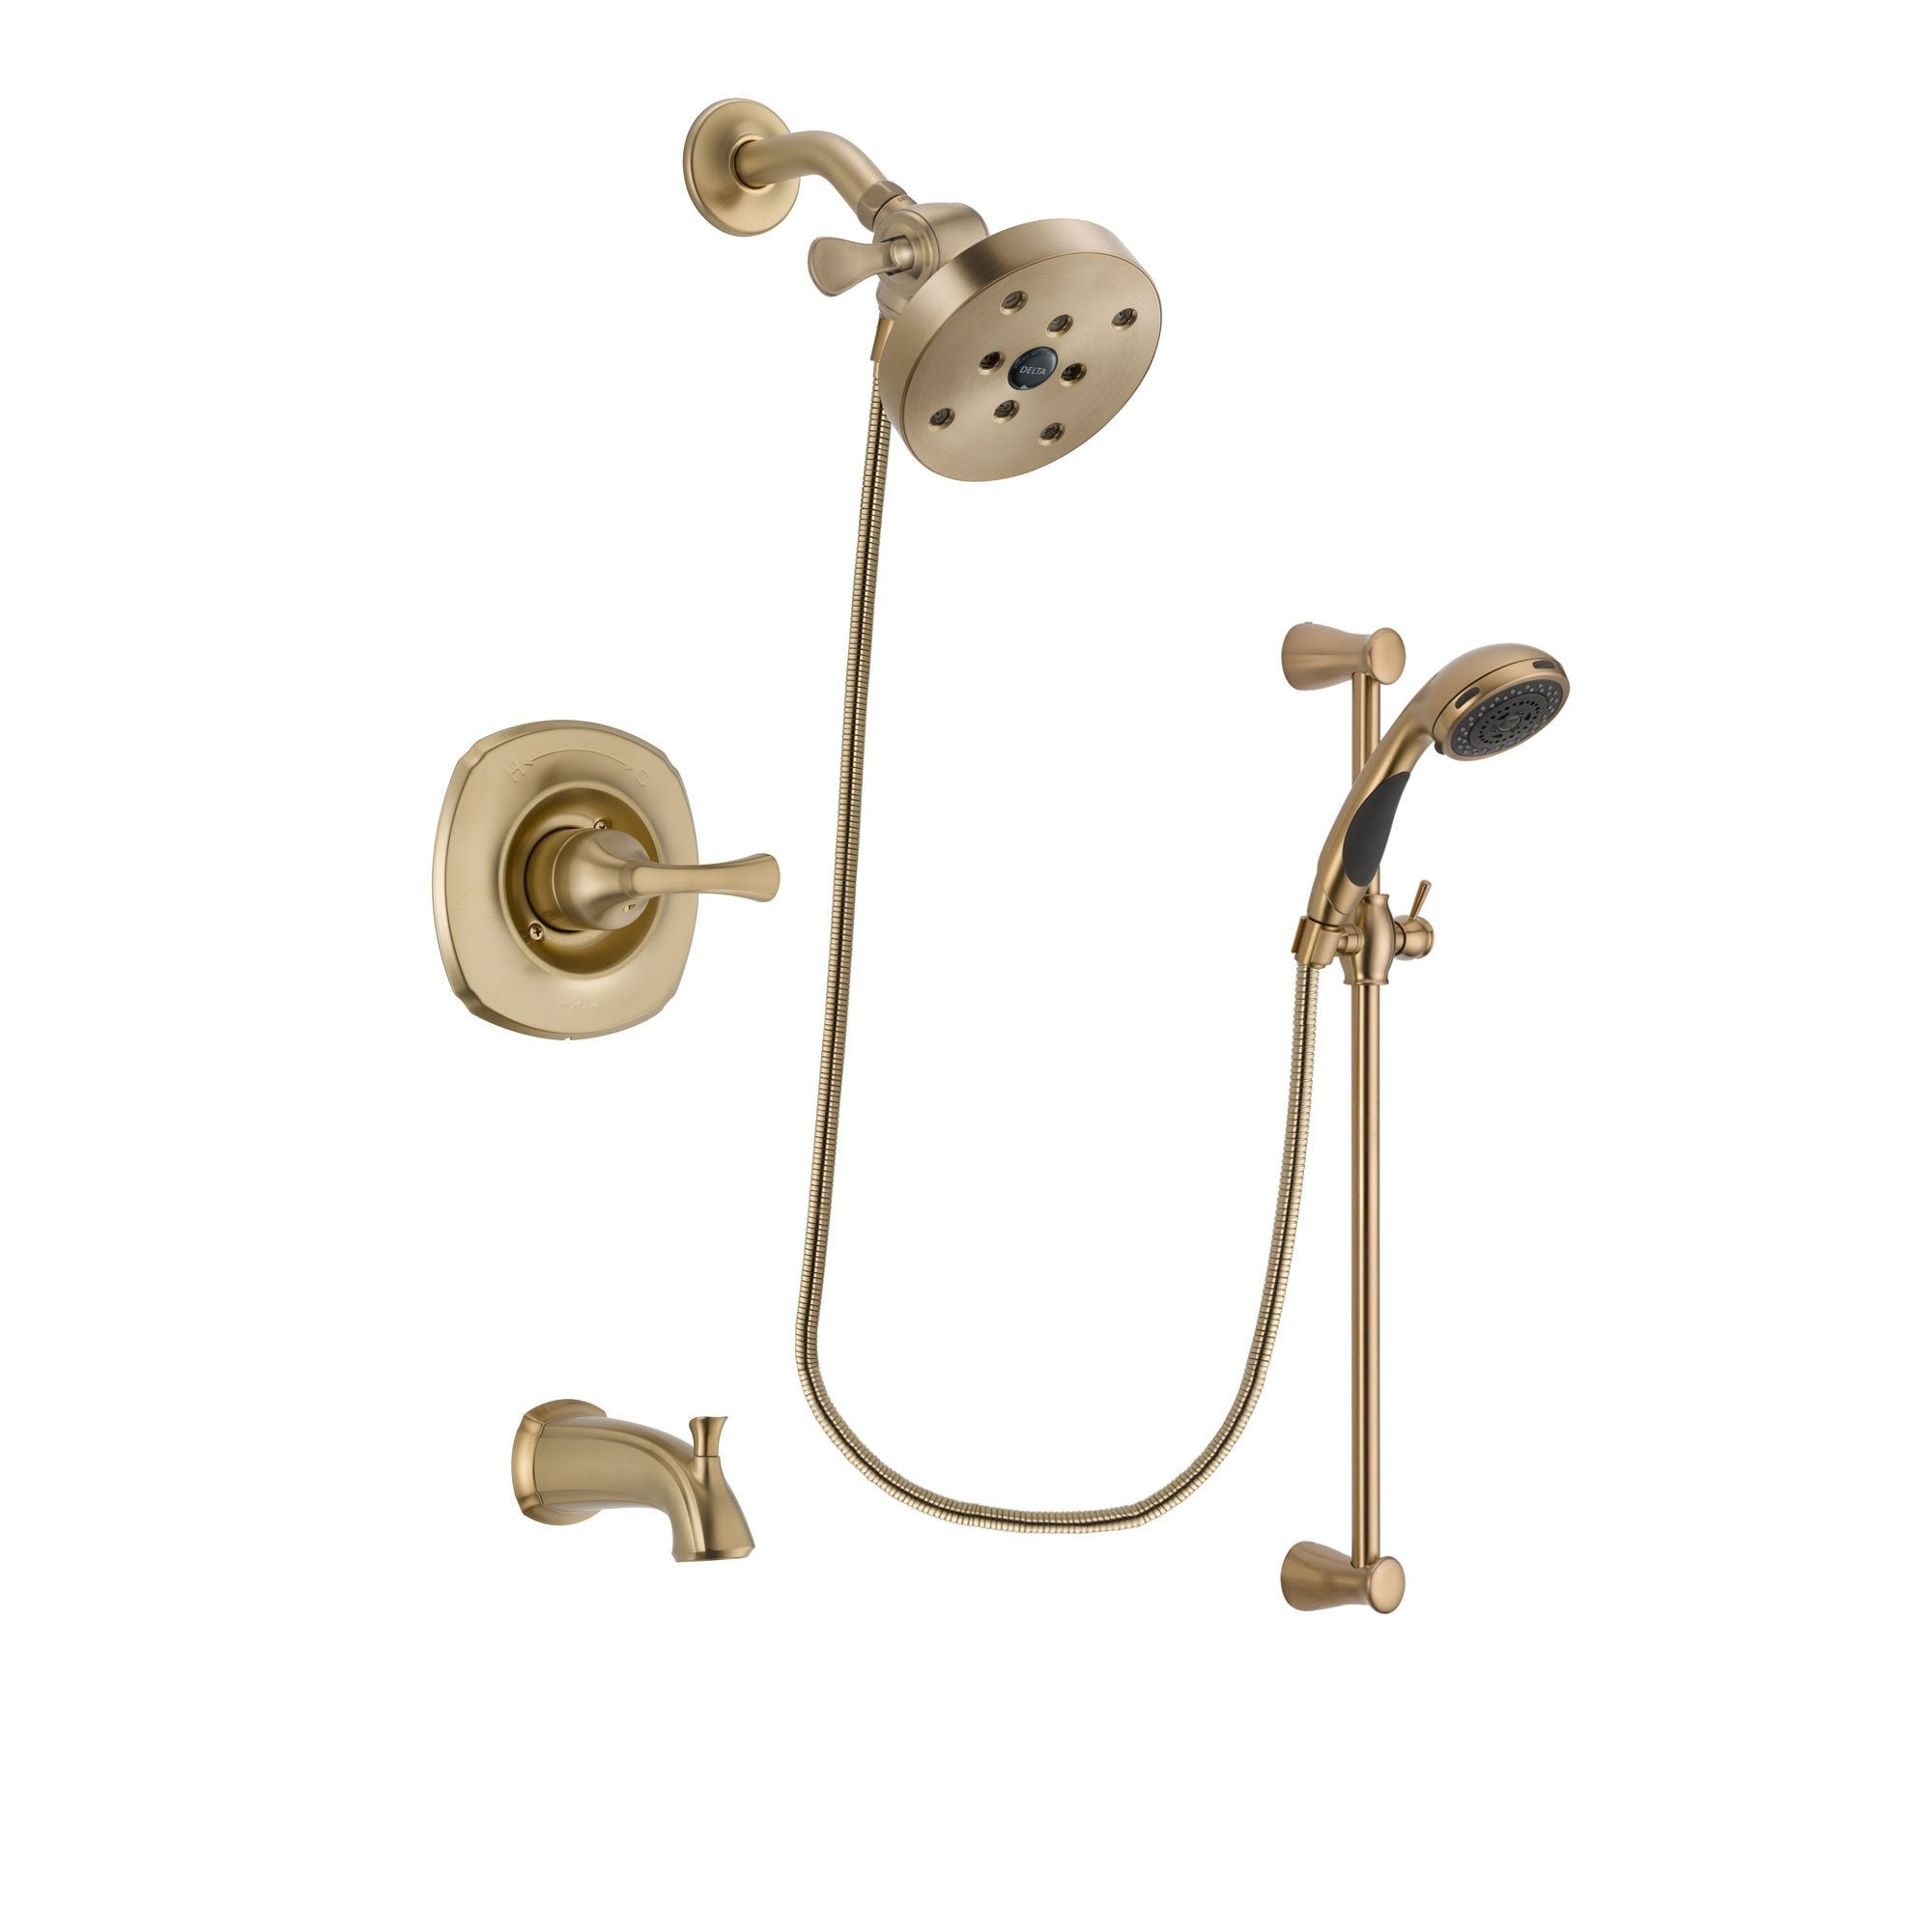 Delta Addison Champagne Bronze Finish Tub and Shower Faucet System Package with 5-1/2 inch Showerhead and Personal Handheld Shower Sprayer with Slide Bar Includes Rough-in Valve and Tub Spout DSP3511V